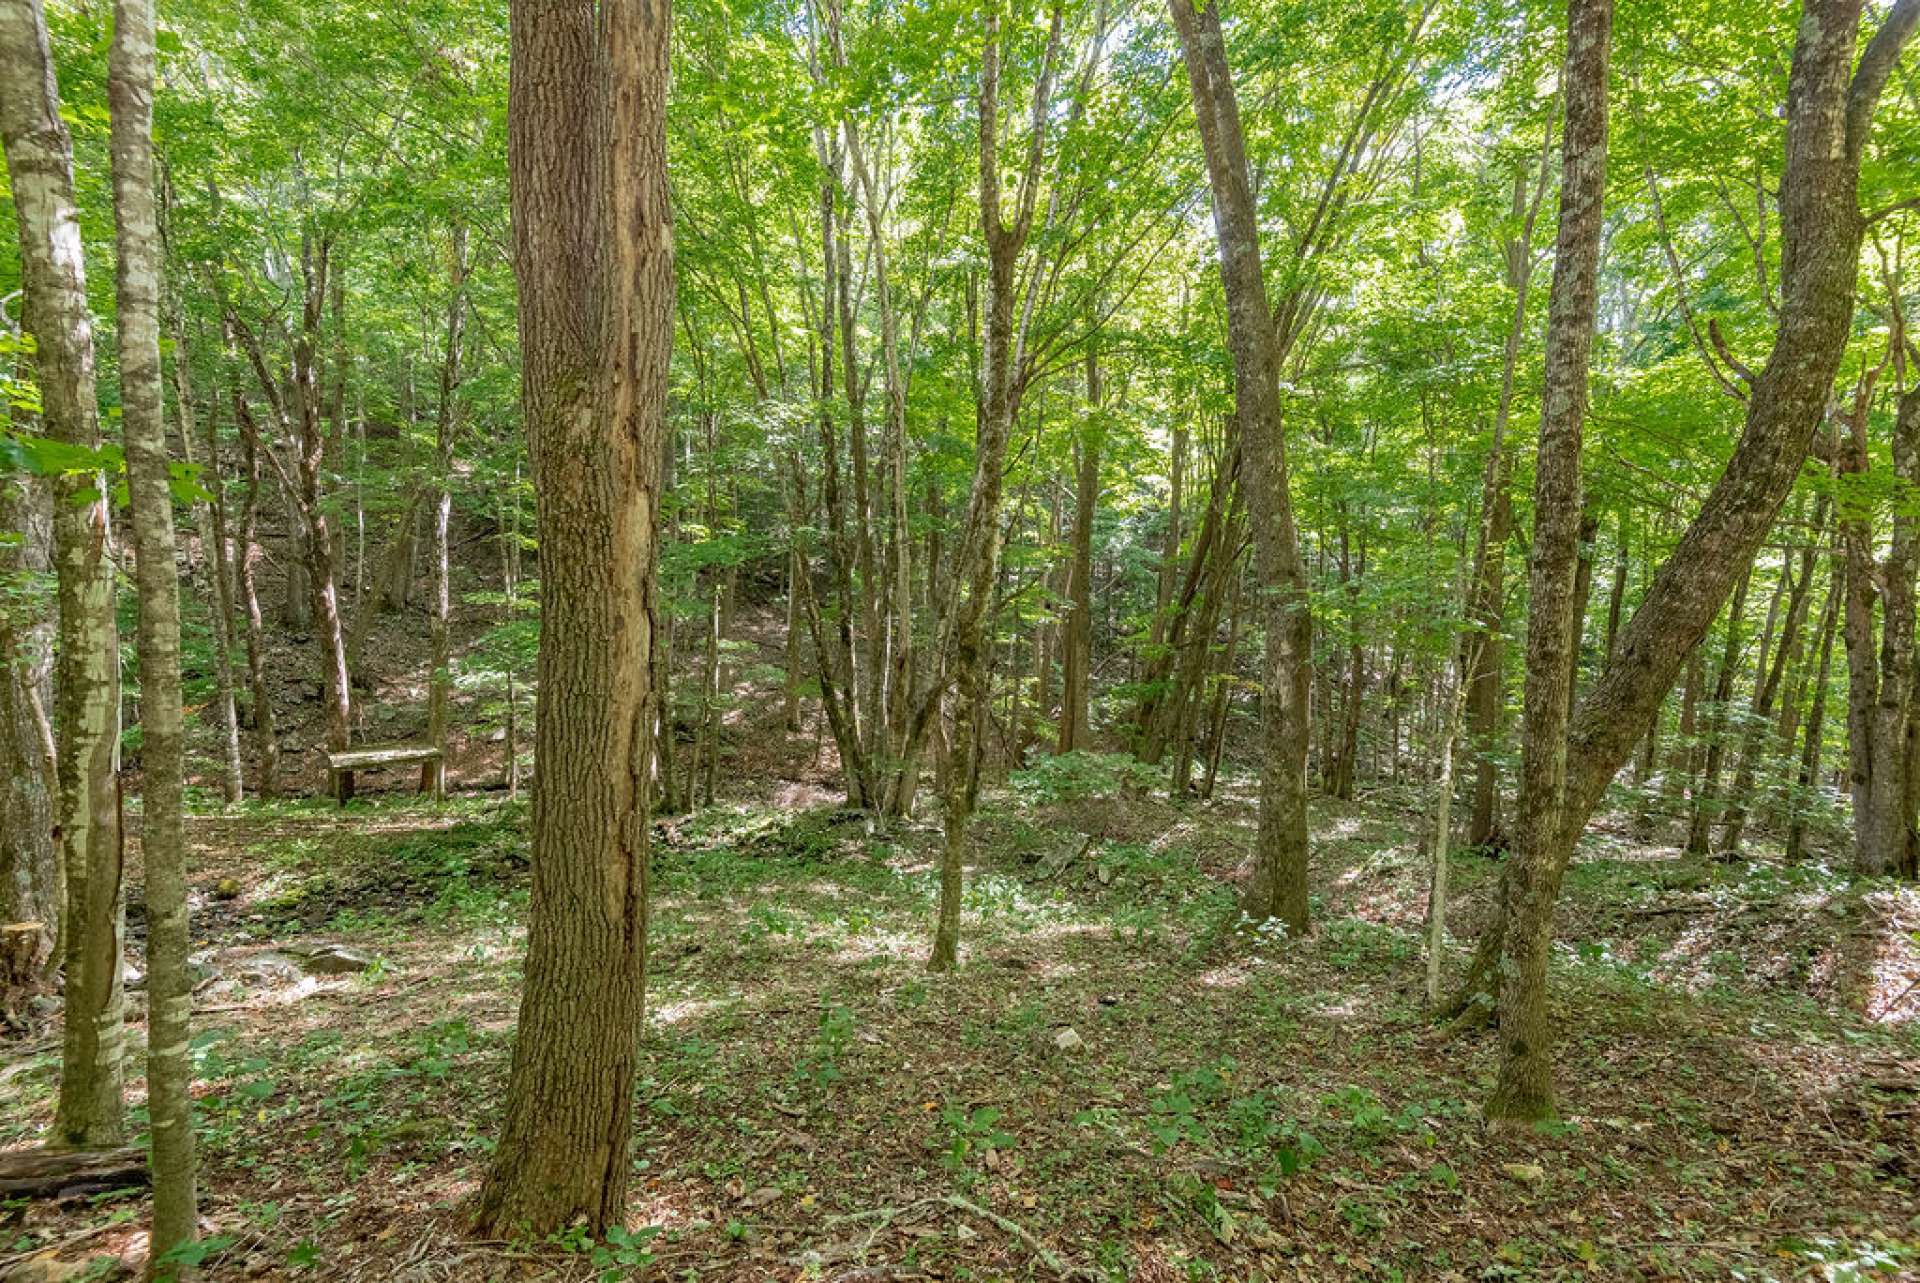 So many places to play, forage, and discover on this property. Shhhhhh....you might catch a glimpse of a deer, turkey, or a squirrel scampering across a fallen log.